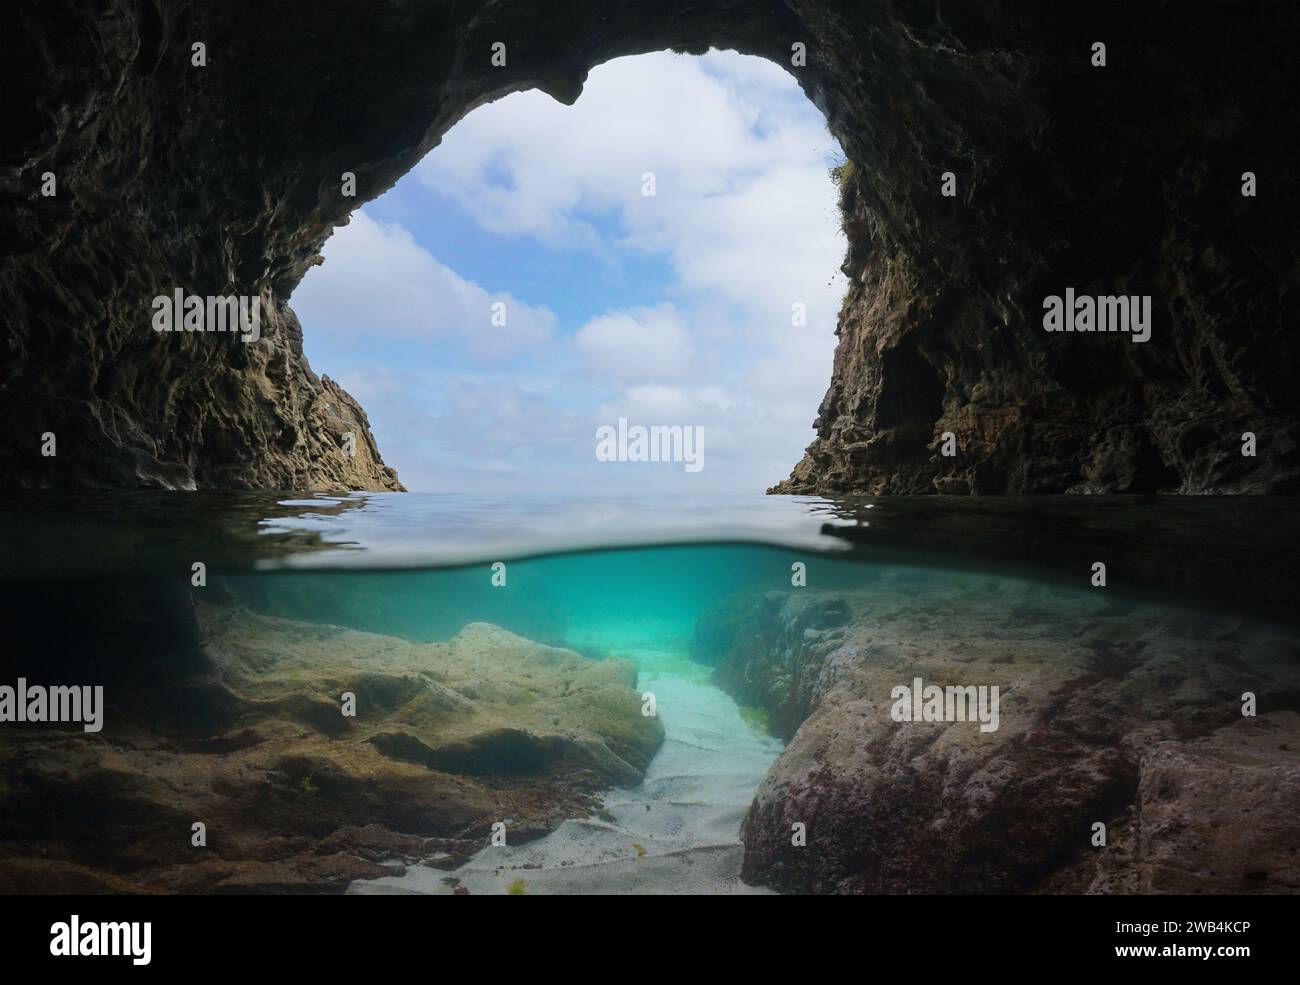 View from a sea cave on the Atlantic coast of Spain, split level view over and under water surface, natural scene, Galicia, Rias Baixas Stock Photo